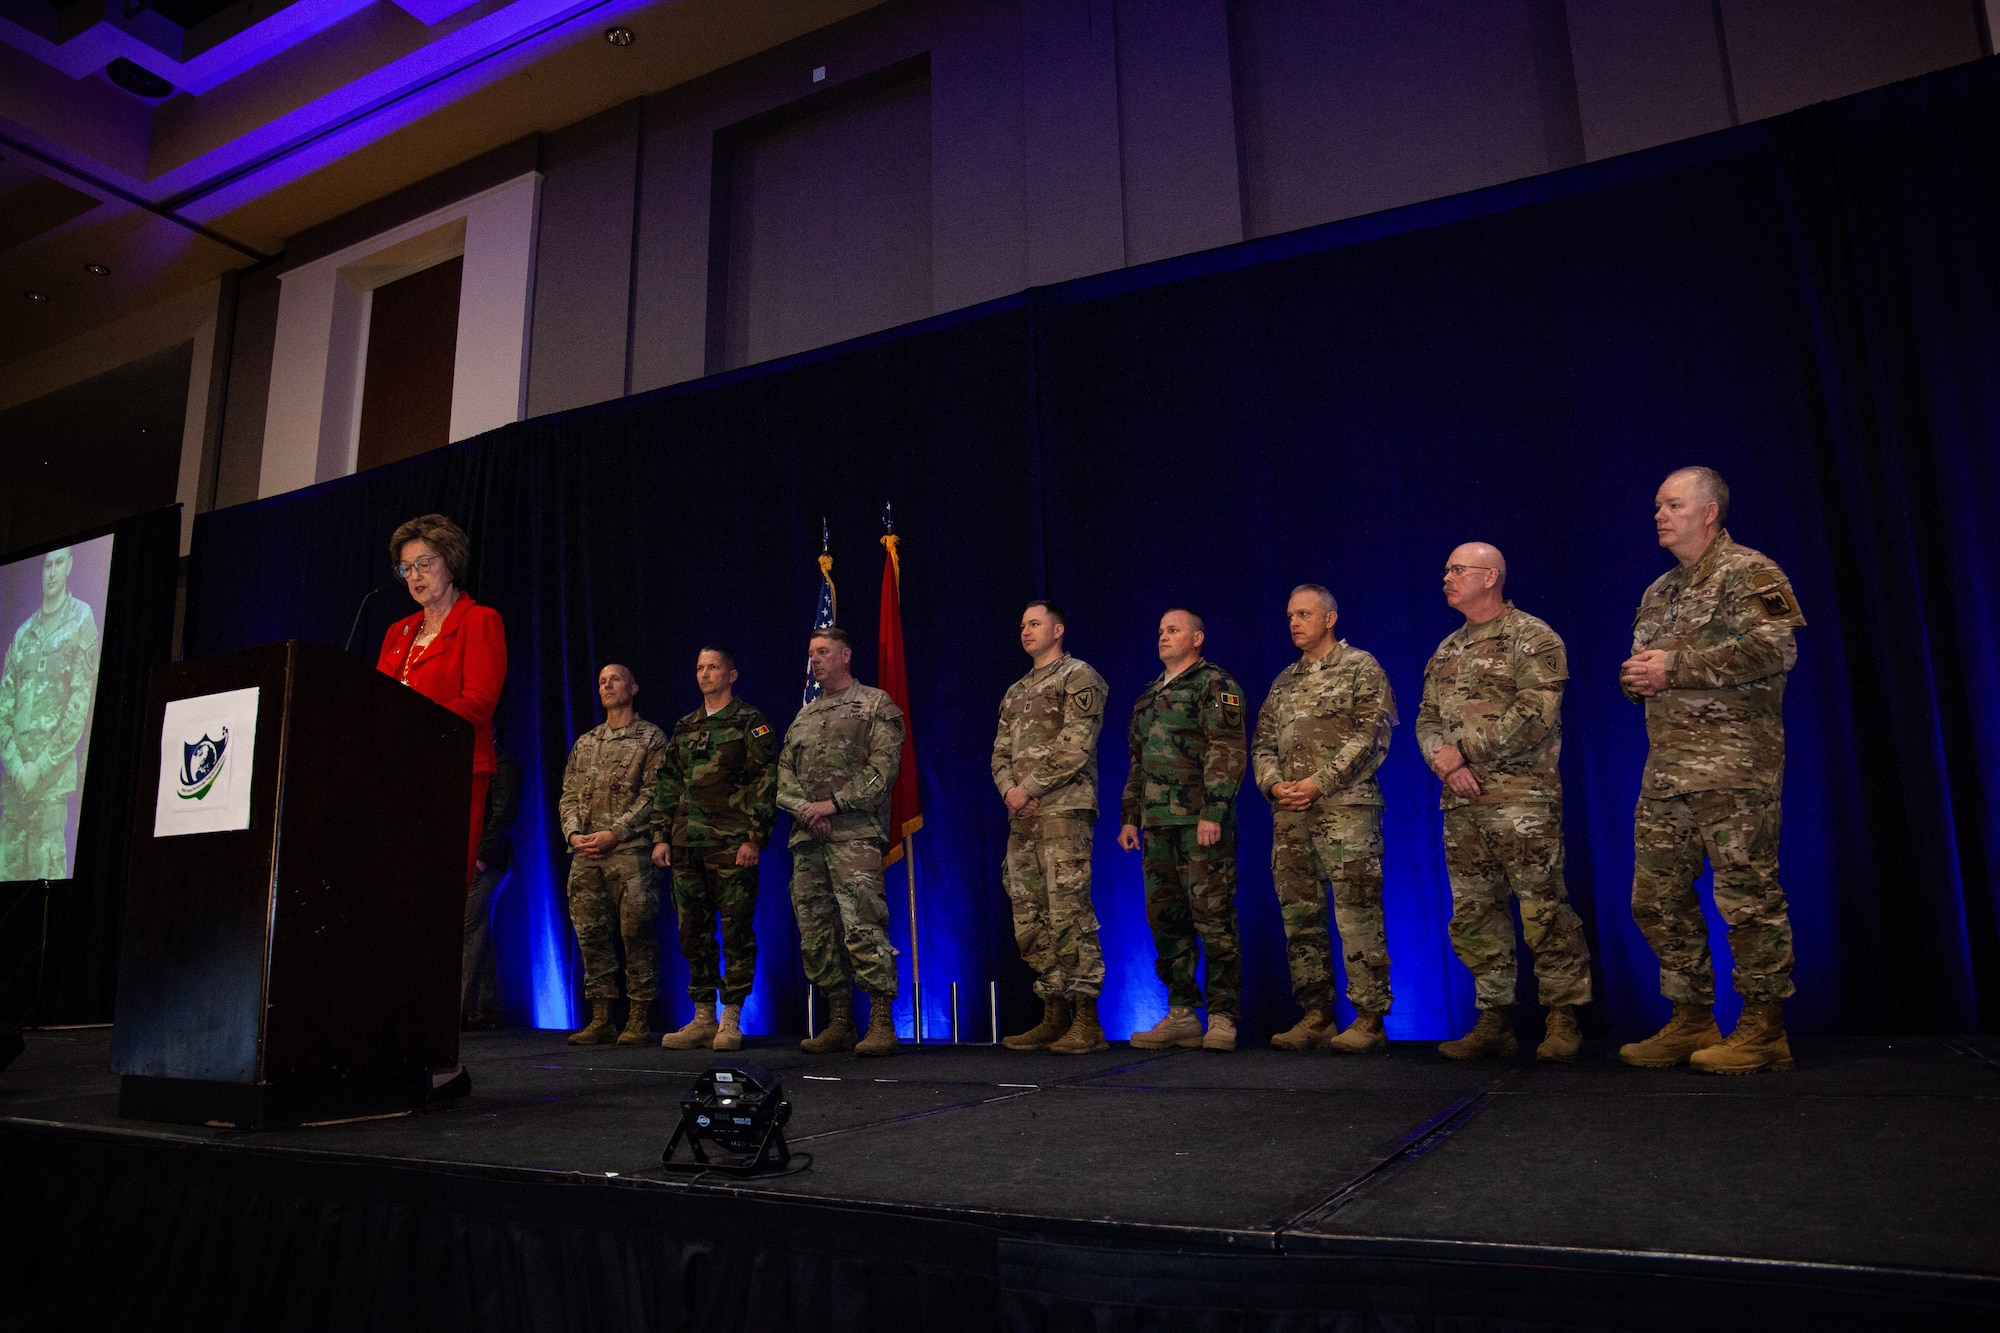 North Carolina Secretary of State Elaine Marshall speaks at the annual conference where the North Carolina National Guard and Moldova were awarded the 2023 Partnership of the Year at the State Partnership Program’s annual conference on April 16-18.